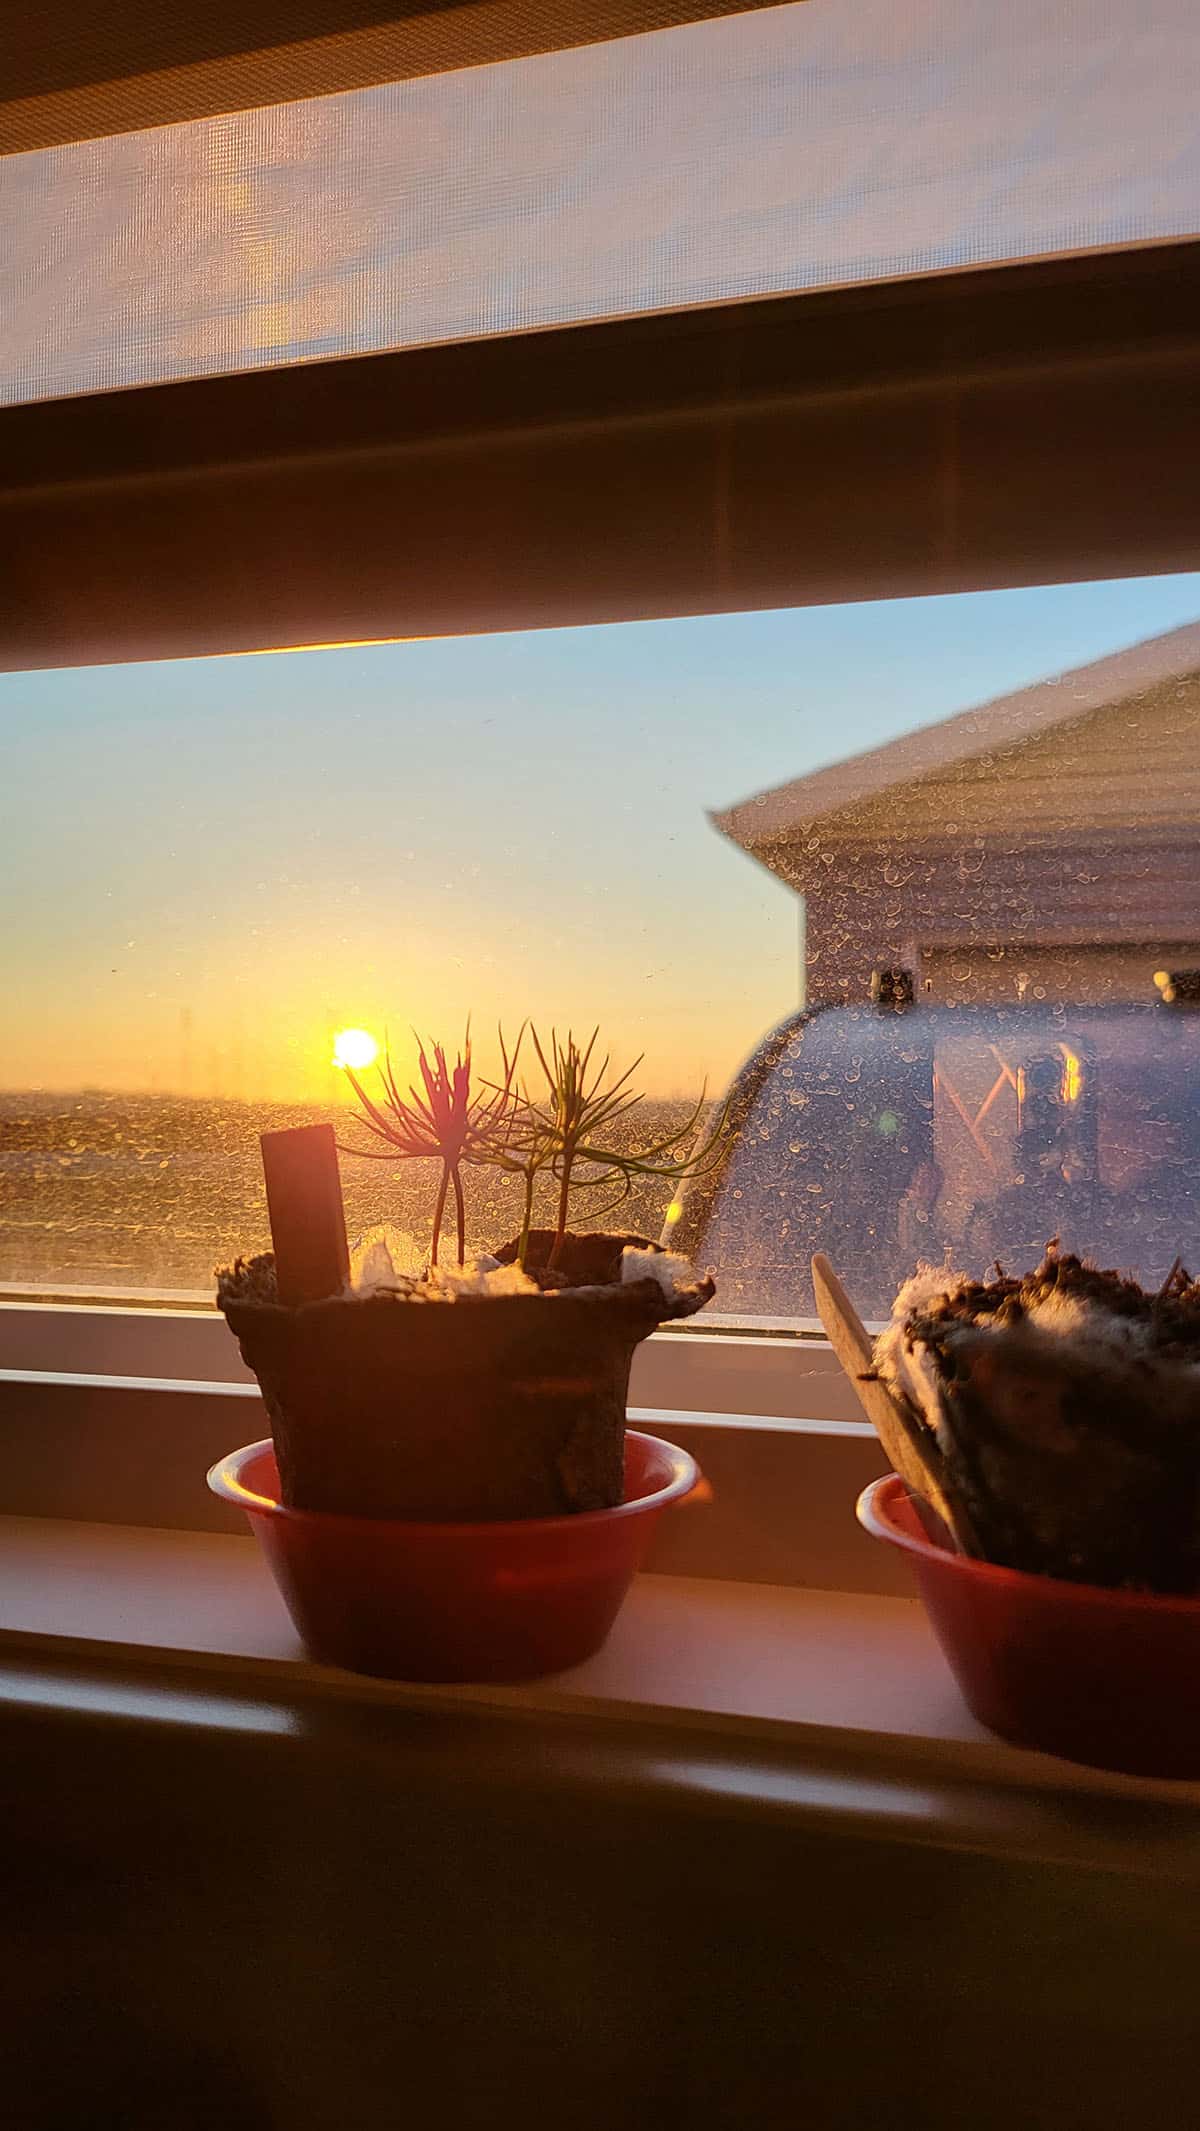 A pot of seedling by the window.